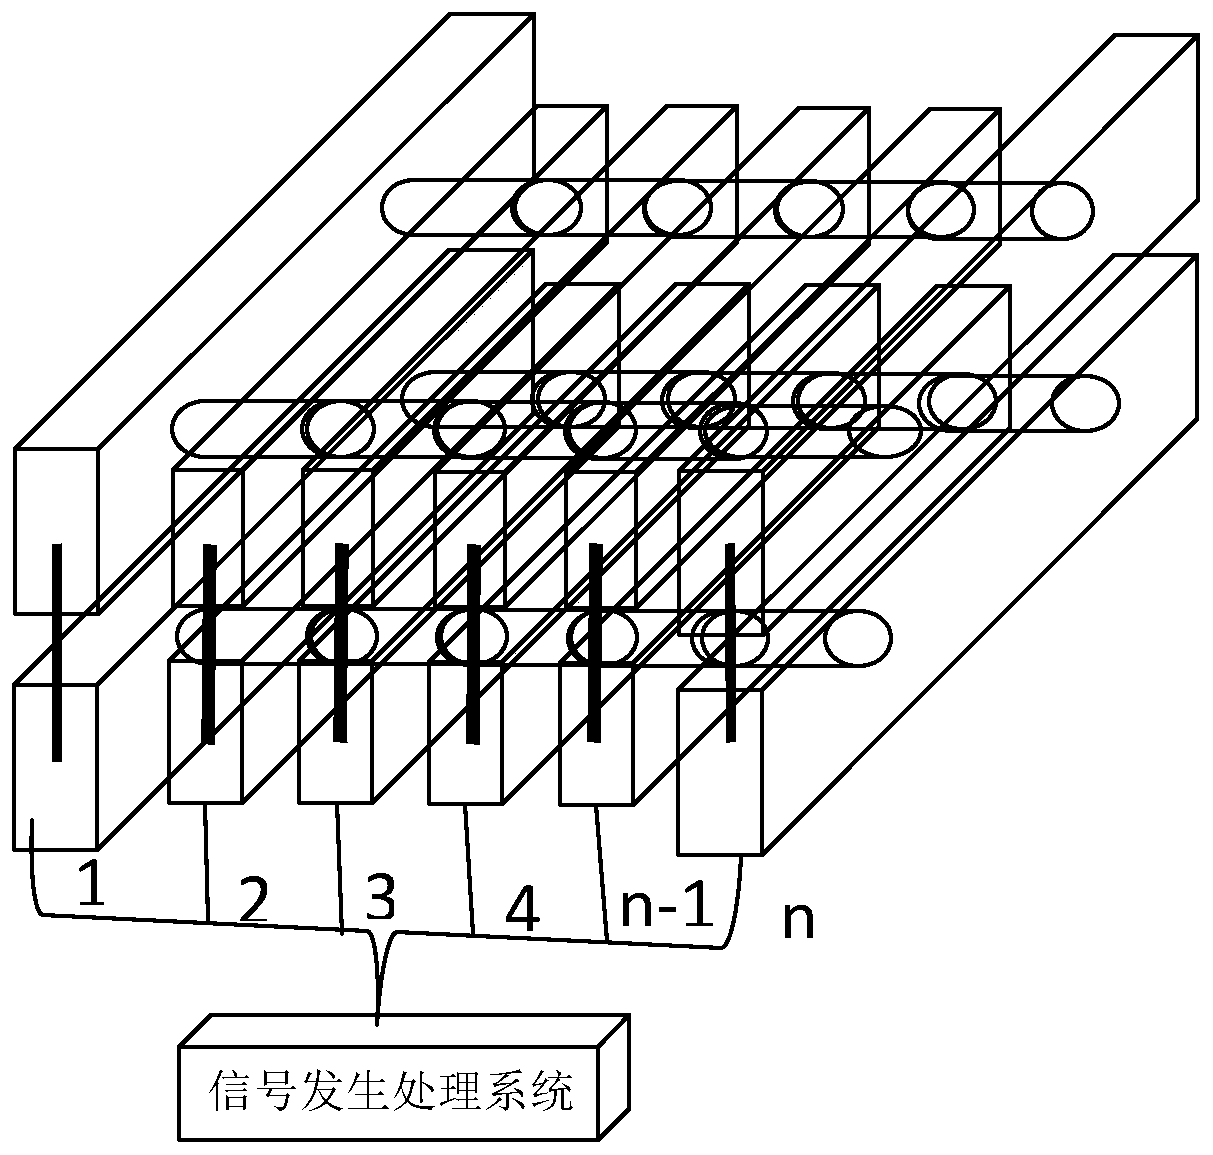 Method for improving contrast ratio of liquid crystal display panel and parallel electric field generating device